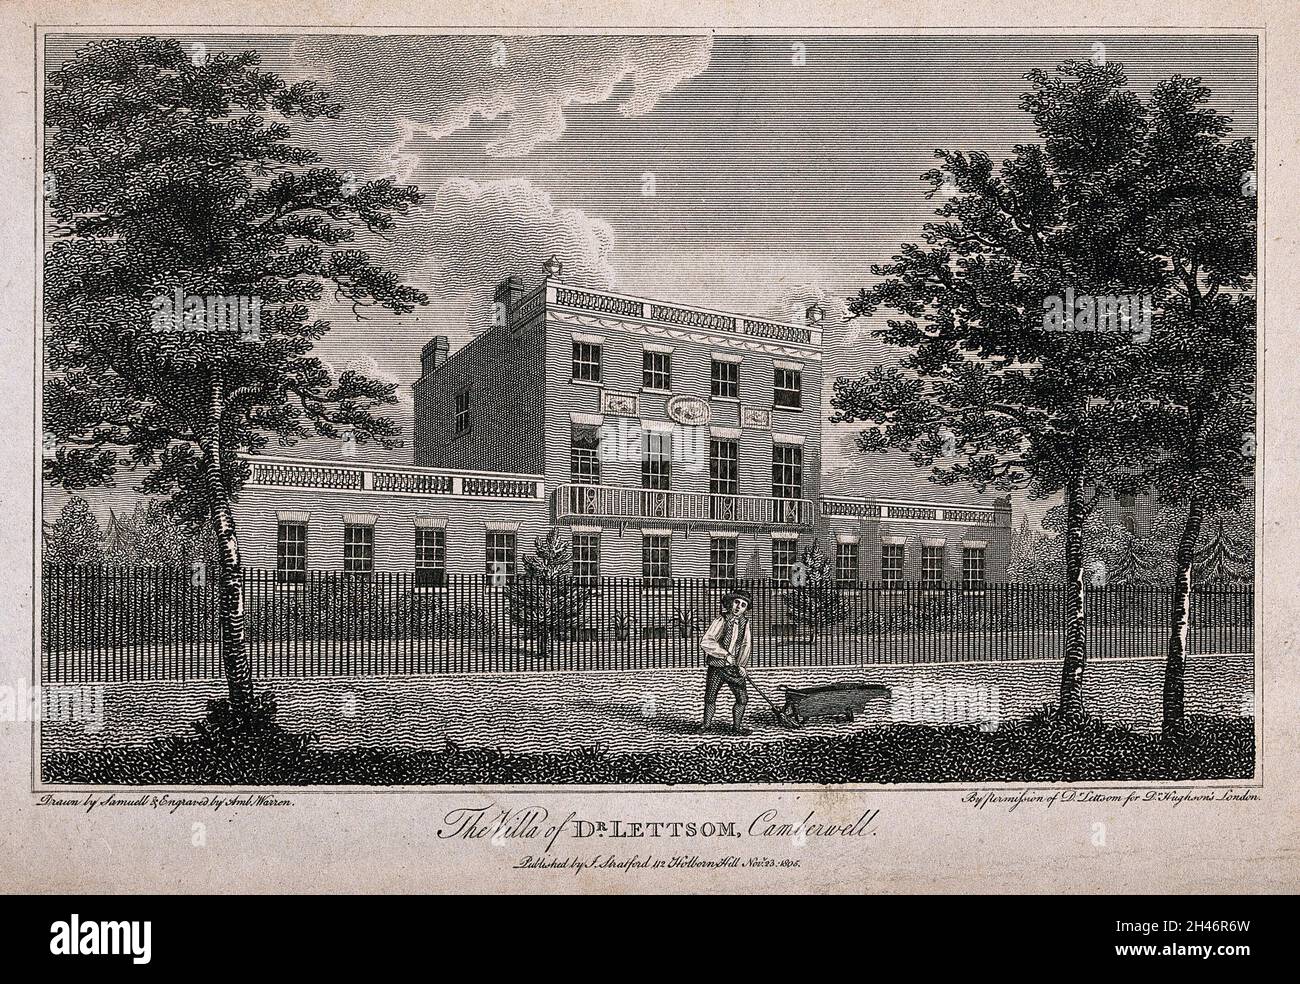 John Coakley Lettsom's house, Grove Hill, Camberwell, Surrey: view from the road. Engraving by Ambrose Warren after G. Samuel, 1805. Stock Photo